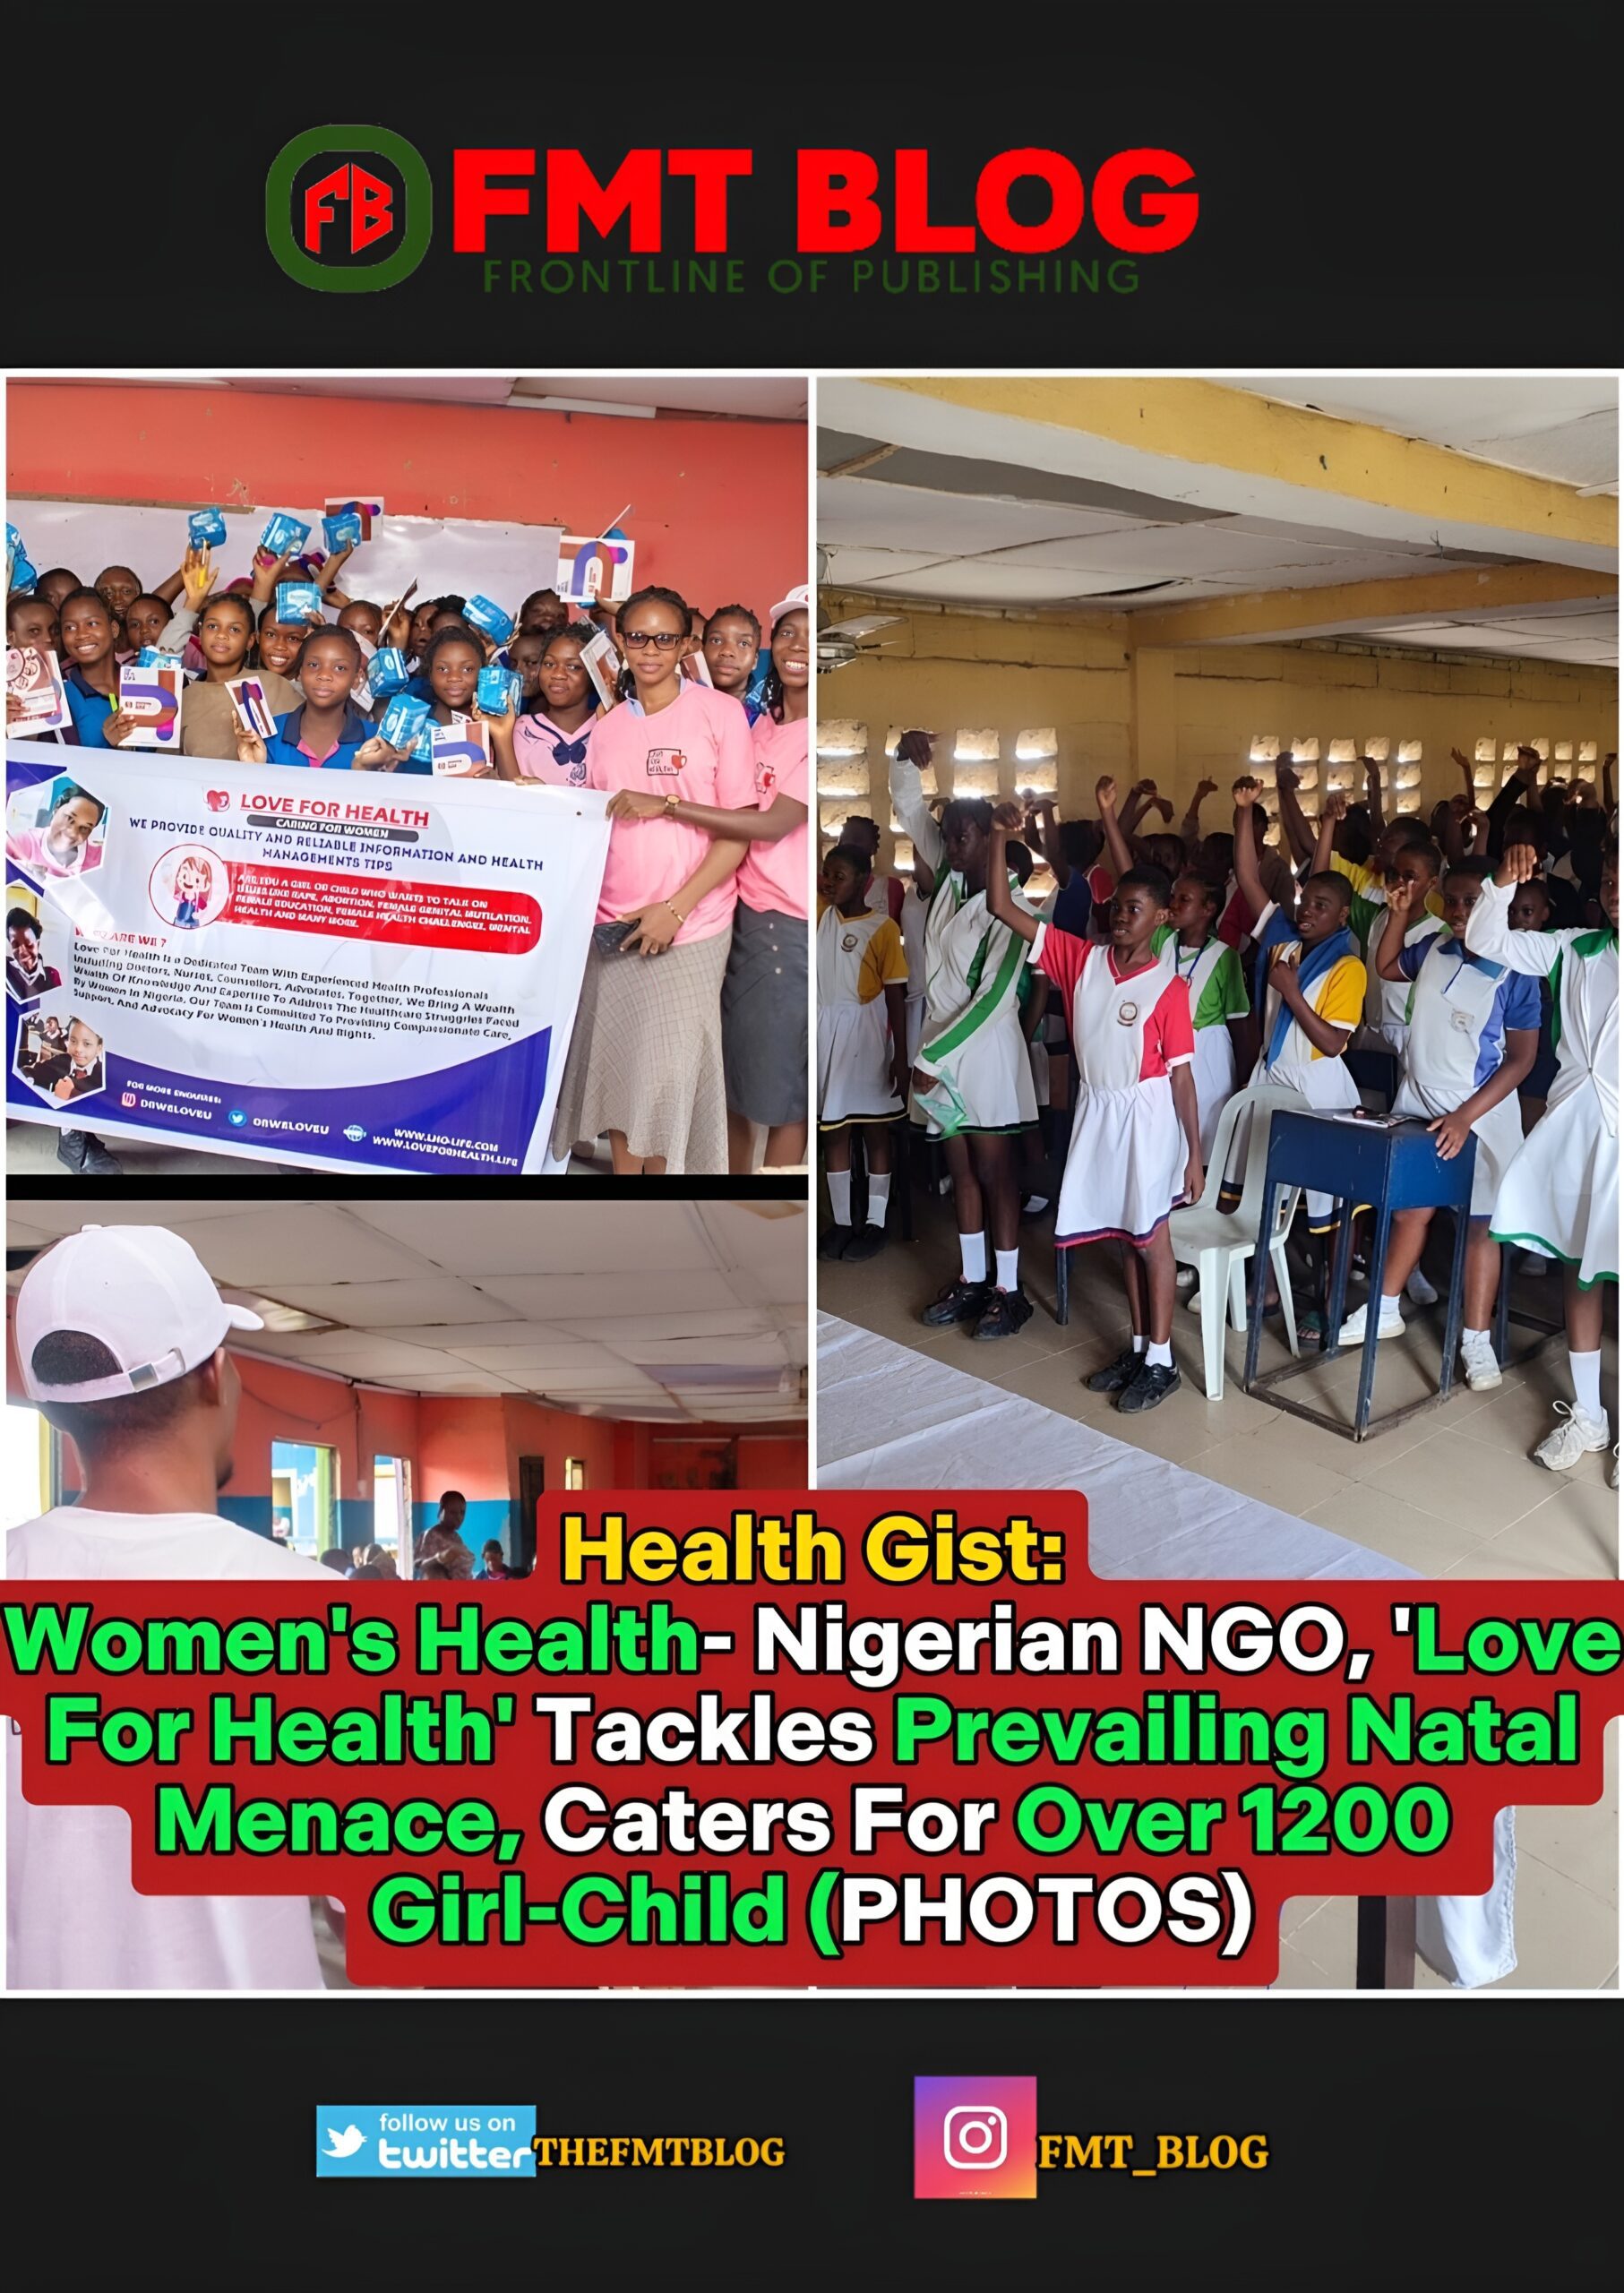 Women’s Health- Nigerian NGO, ‘Love For Health’ Tackles Prevailing Natal Menace, Caters For Over 1200 Girl-Child (PHOTOS)